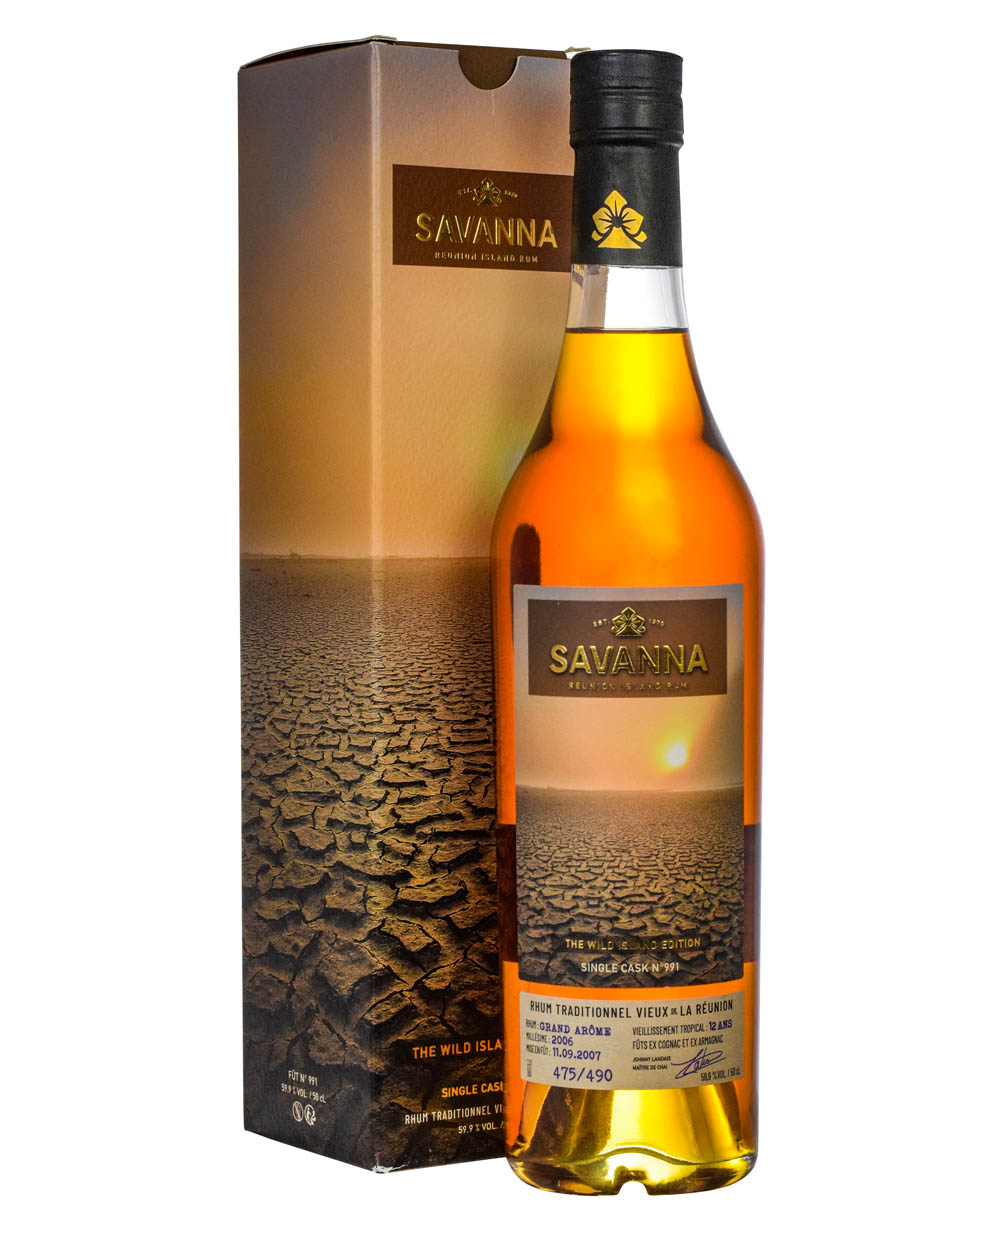 Savanna 12 Years Old Rum Traditionnel Vieux La Reunion 2006 Box Must Have Malts MHM